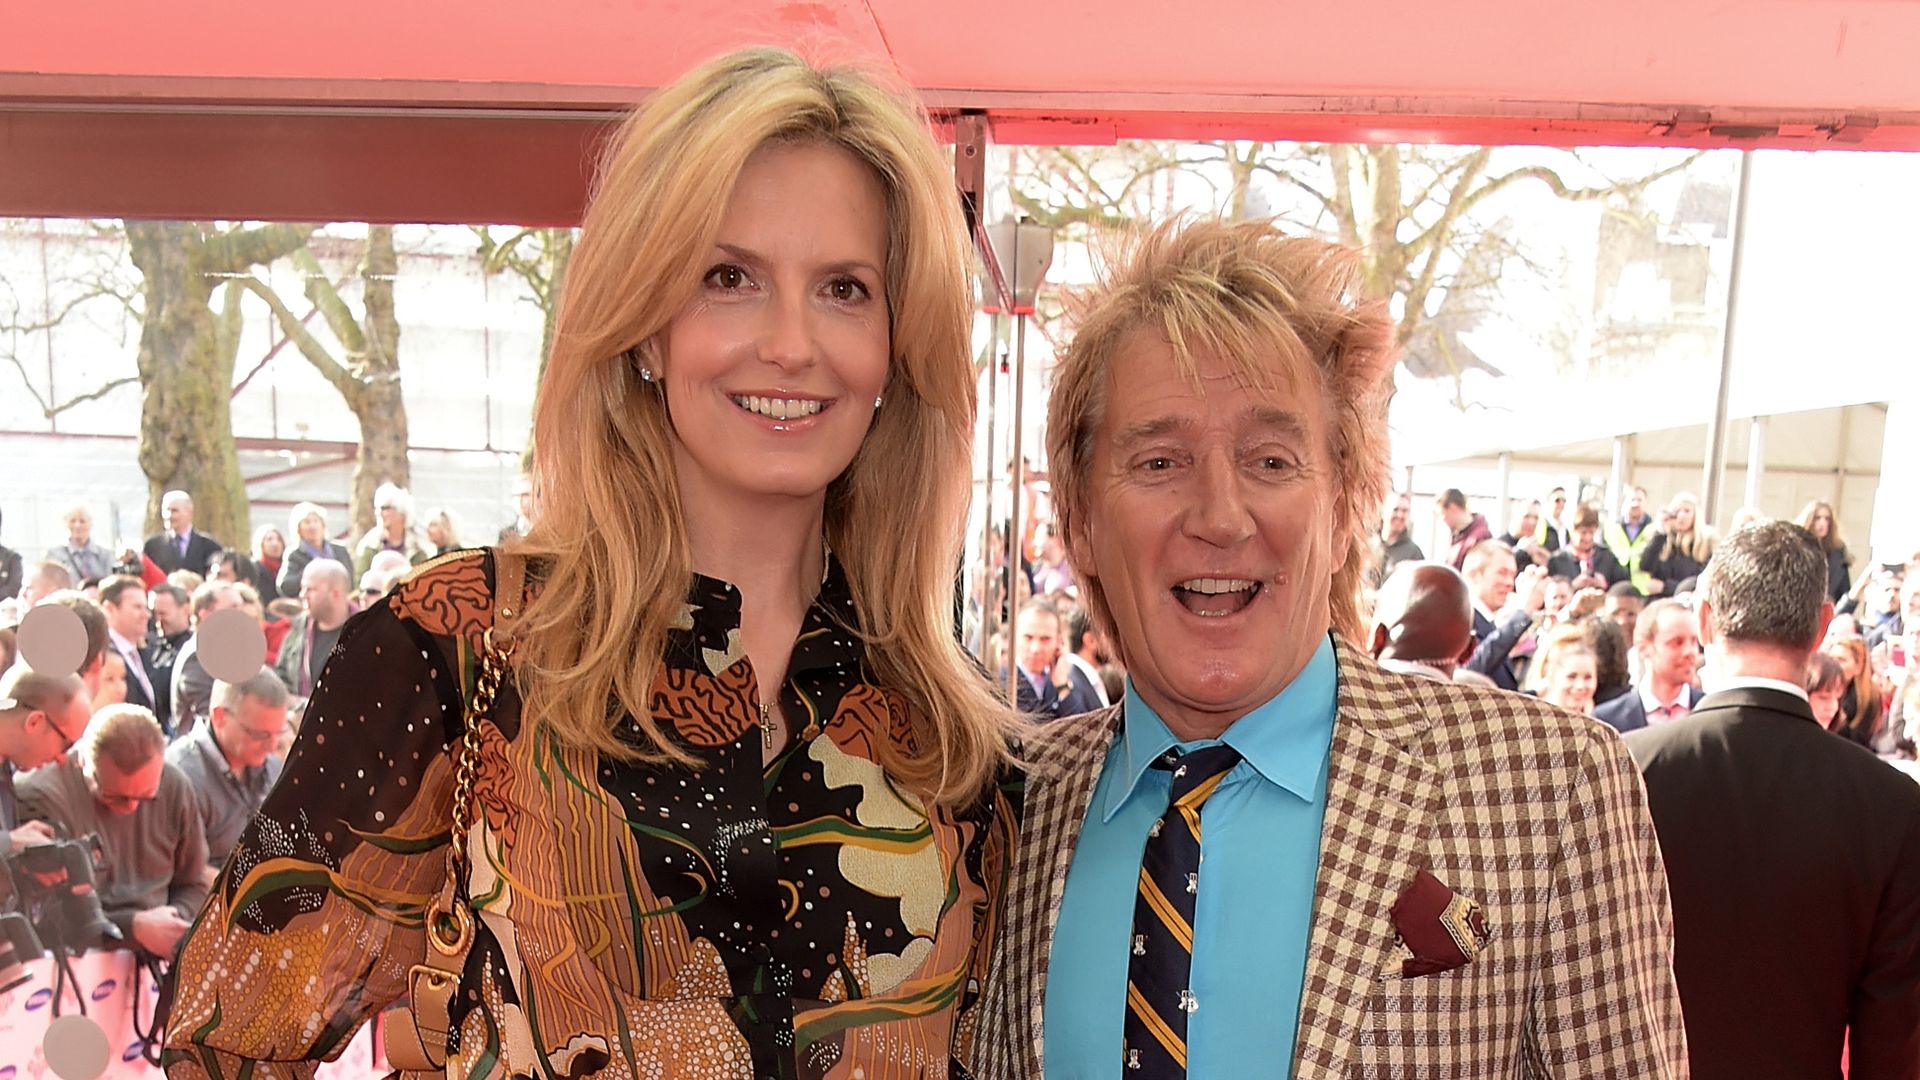 Penny Lancaster and Rod Stewart both wearing beige outfits